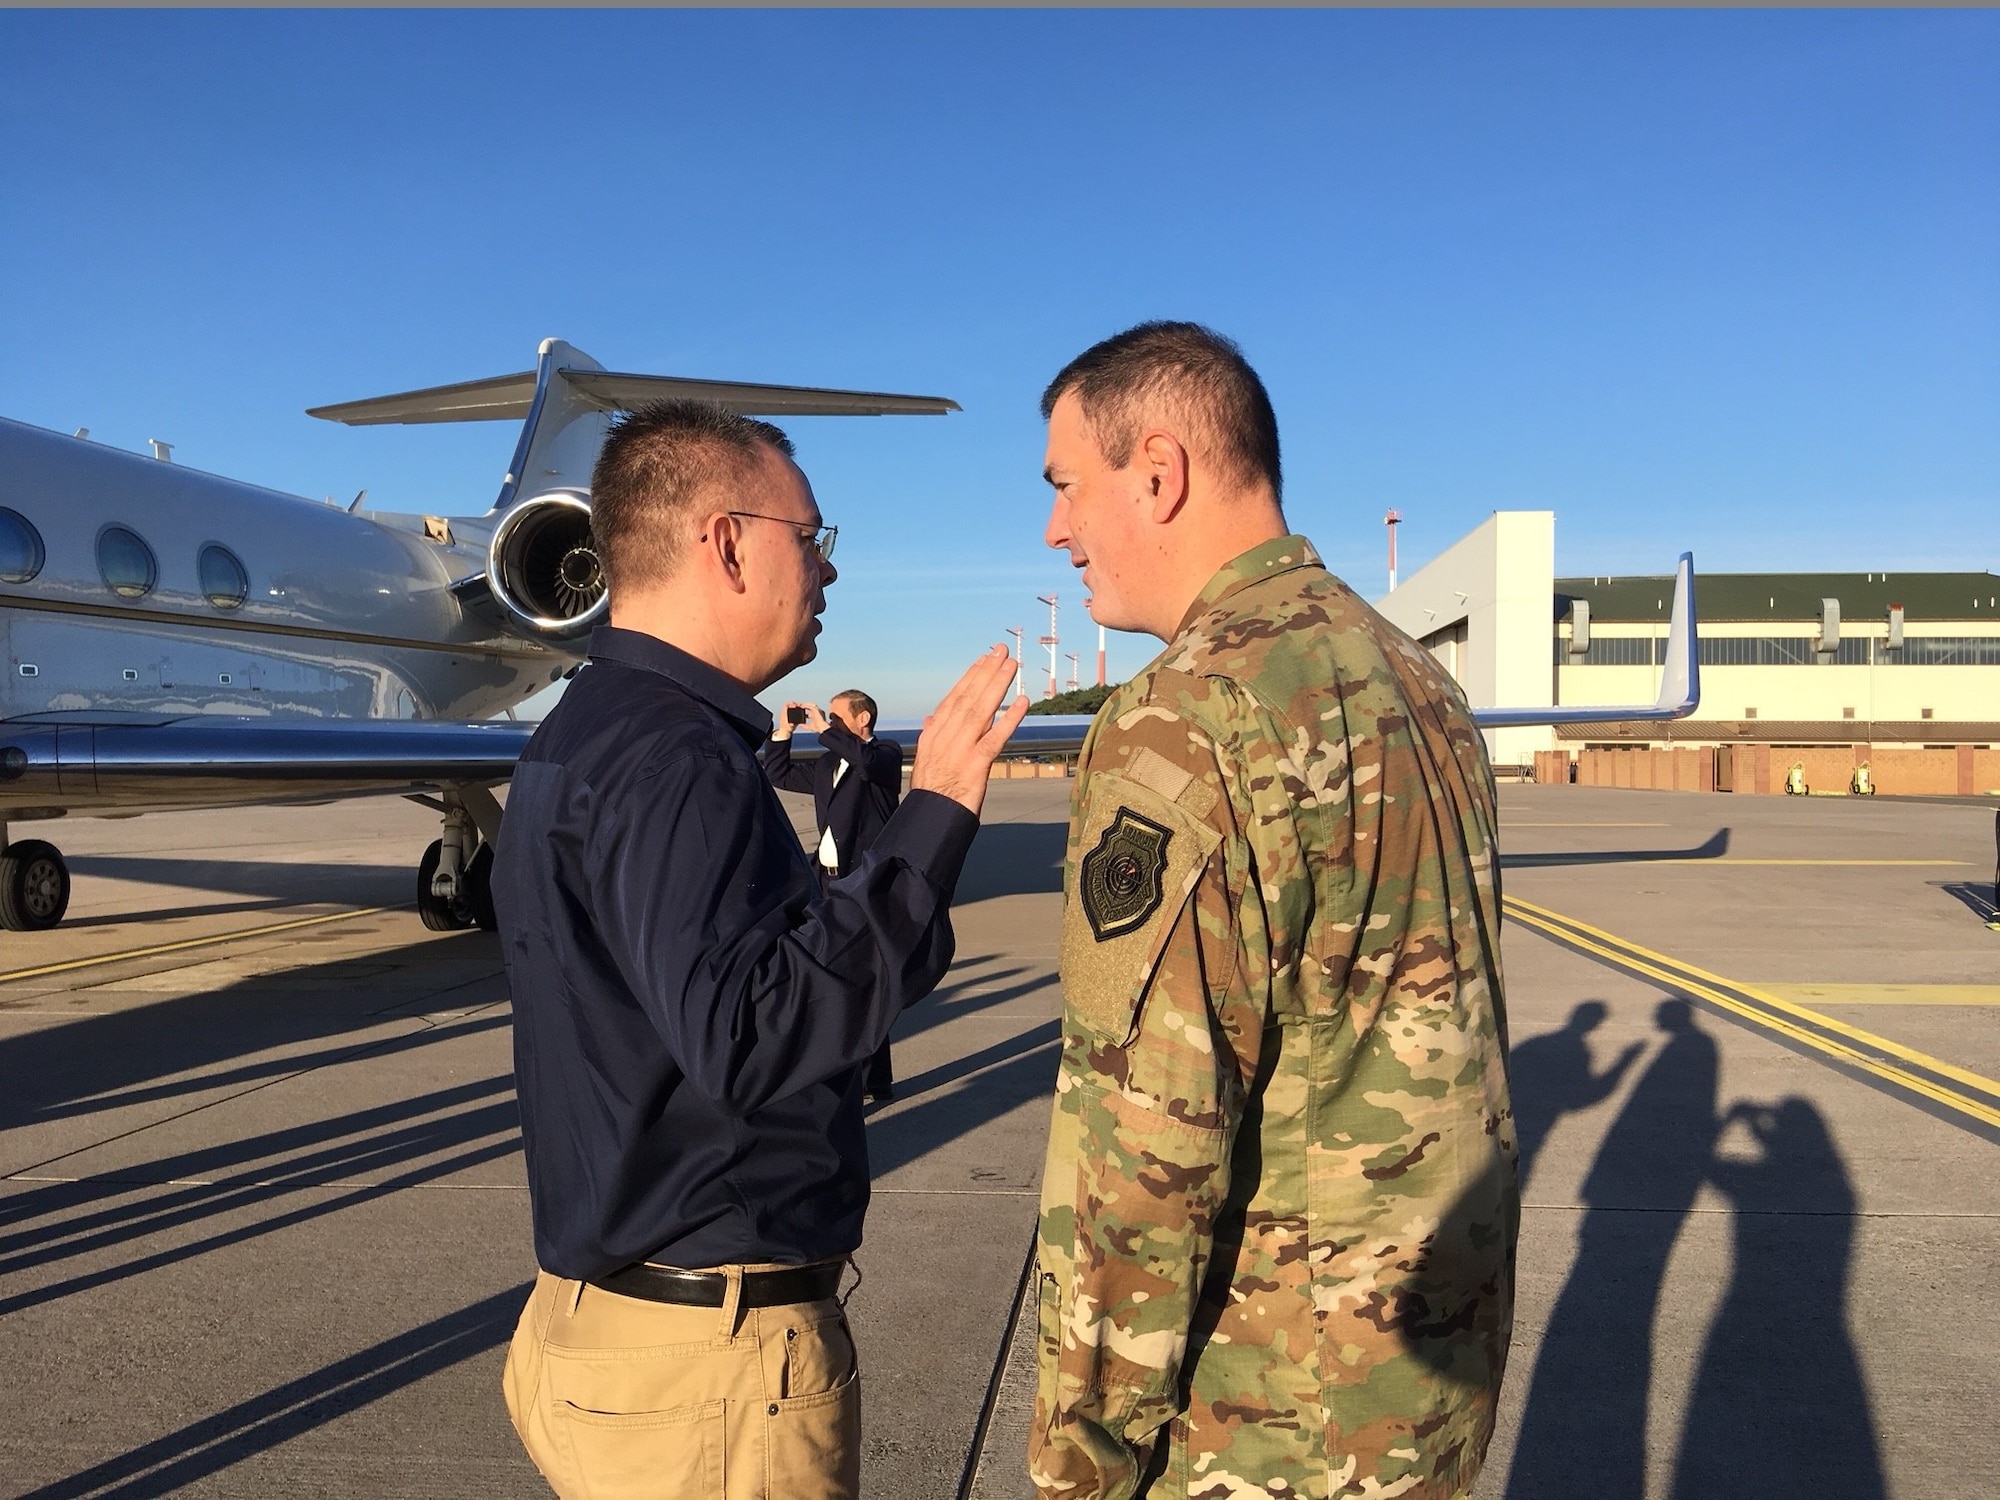 U.S. Air Force Brig. Gen. Mark R. August, 86th Airlift Wing commander, speaks with Andrew Brunson, a U.S. pastor who had been held by the Turkish judiciary for two years, during a stop on his return trip to the U.S. on Ramstein Air Base, Germany, Oct. 13, 2018. A host of Ramstein Airmen worked together to ensure Pastor Brunson's trip home went as smoothly as possible. (Courtesy photo)